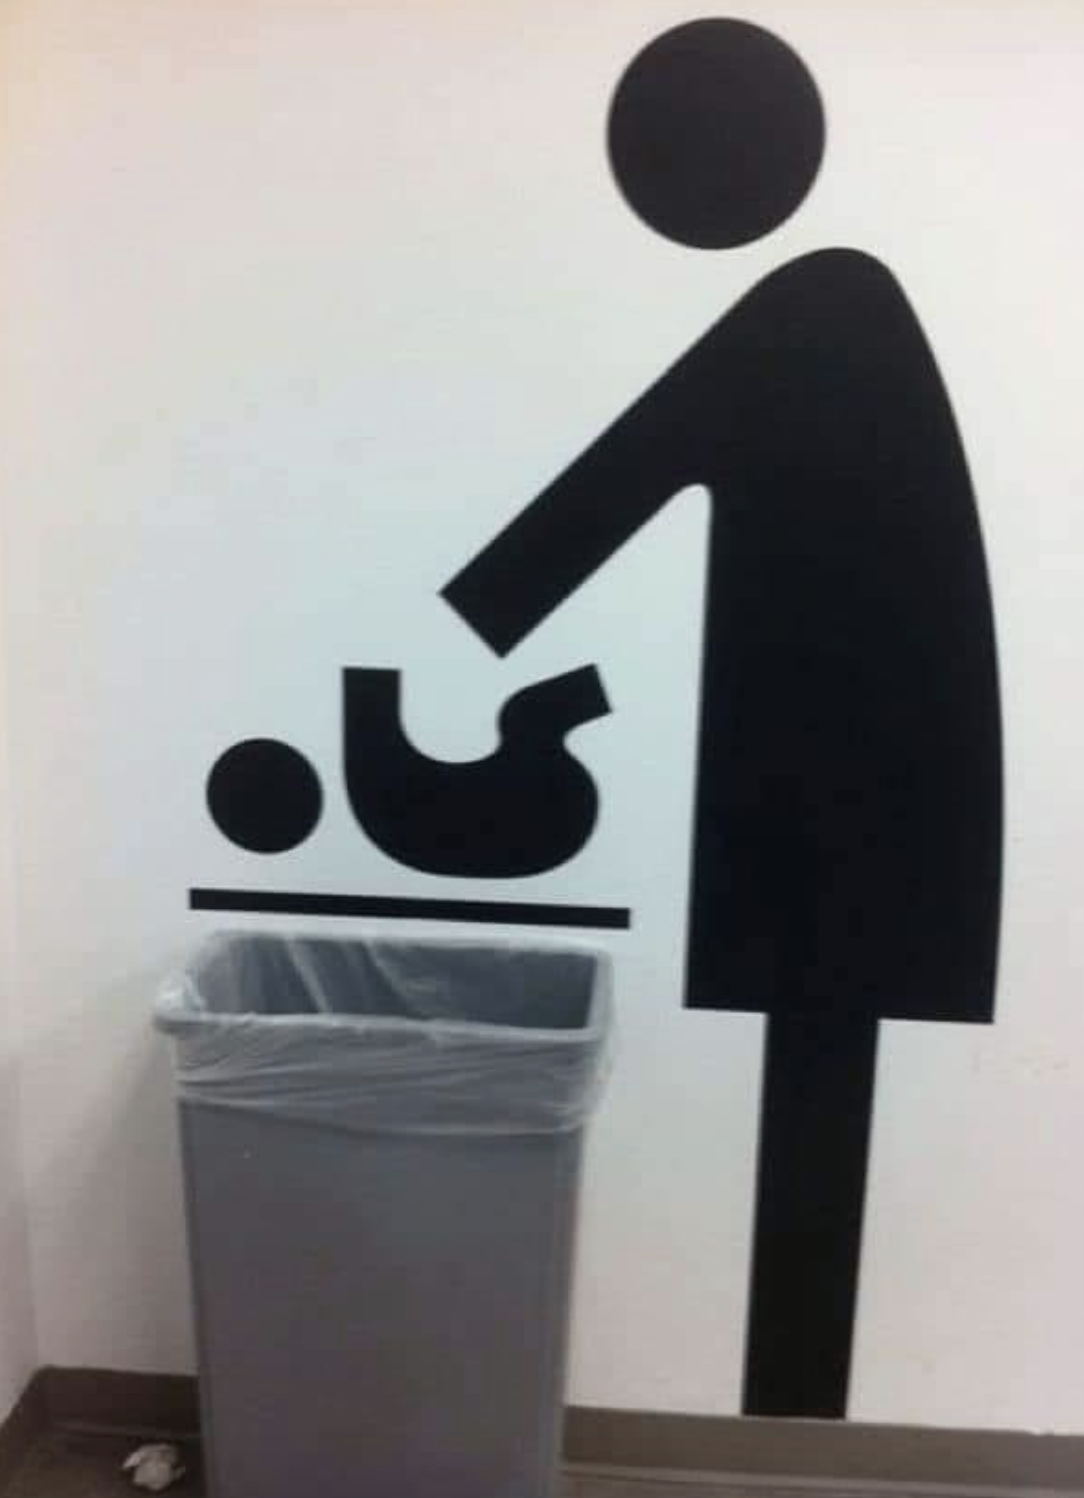 A sign on the wall features a graphic representing a baby changing station, but someone moved a trash can so it looks like the graphic is throwing the baby away&quot;